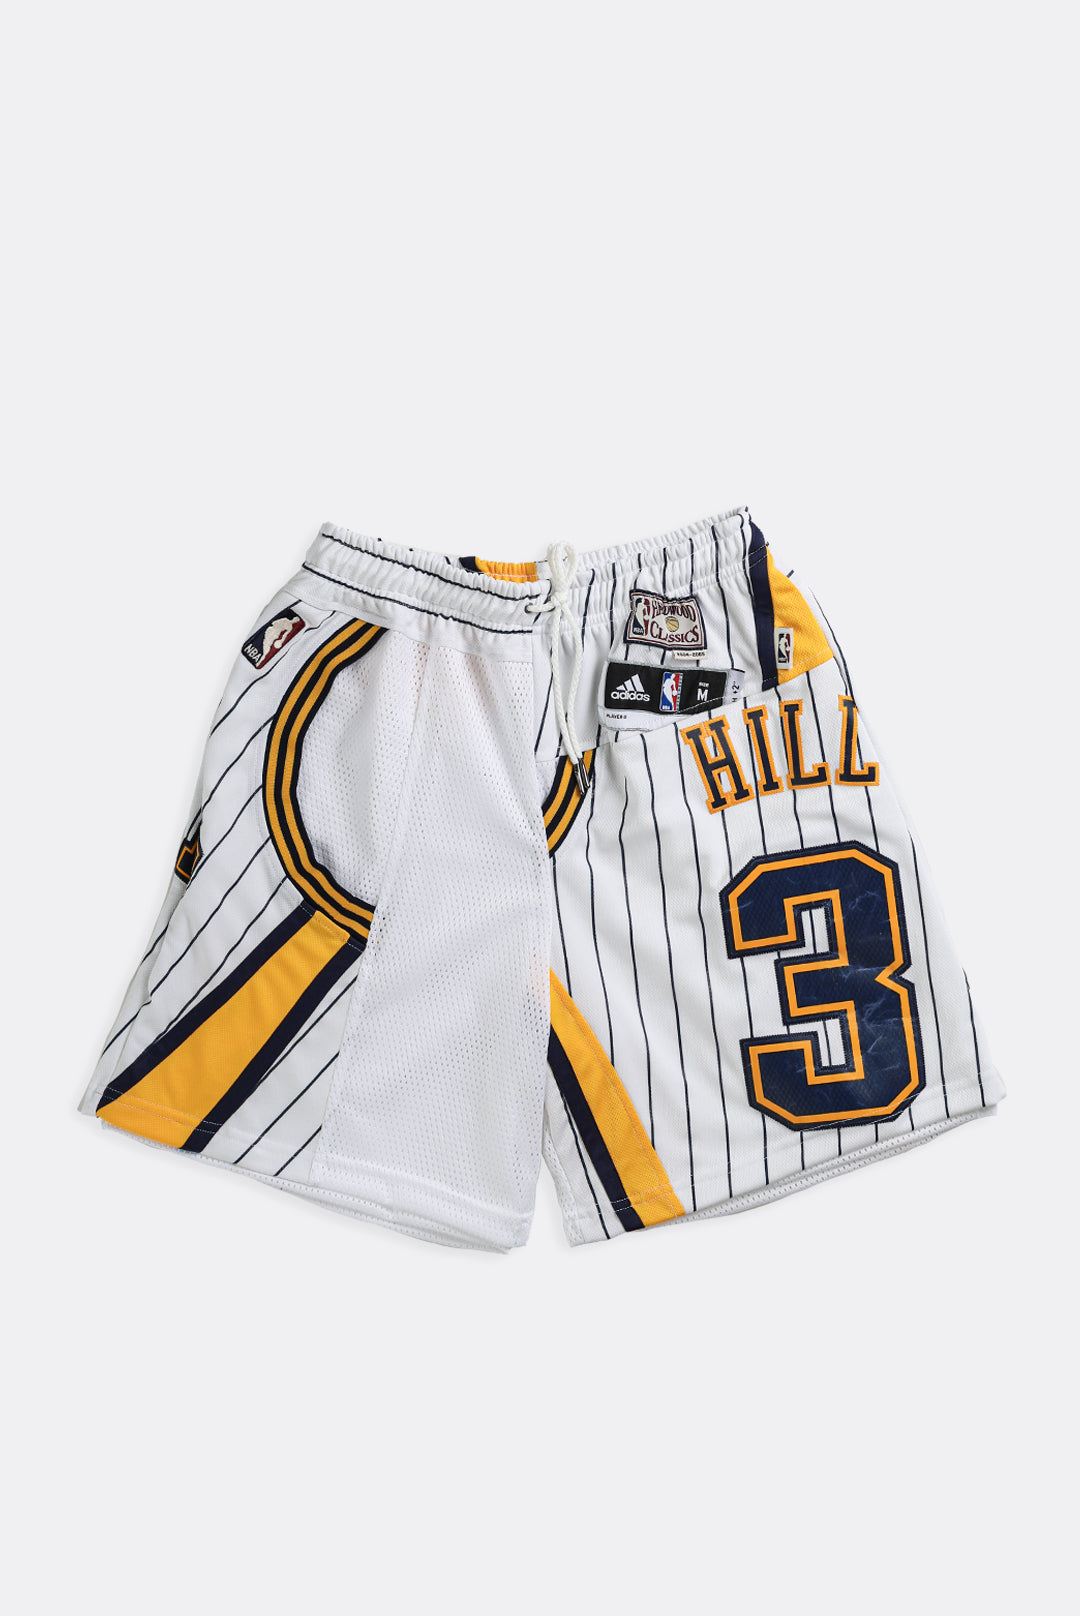 Pacers Retro Collection